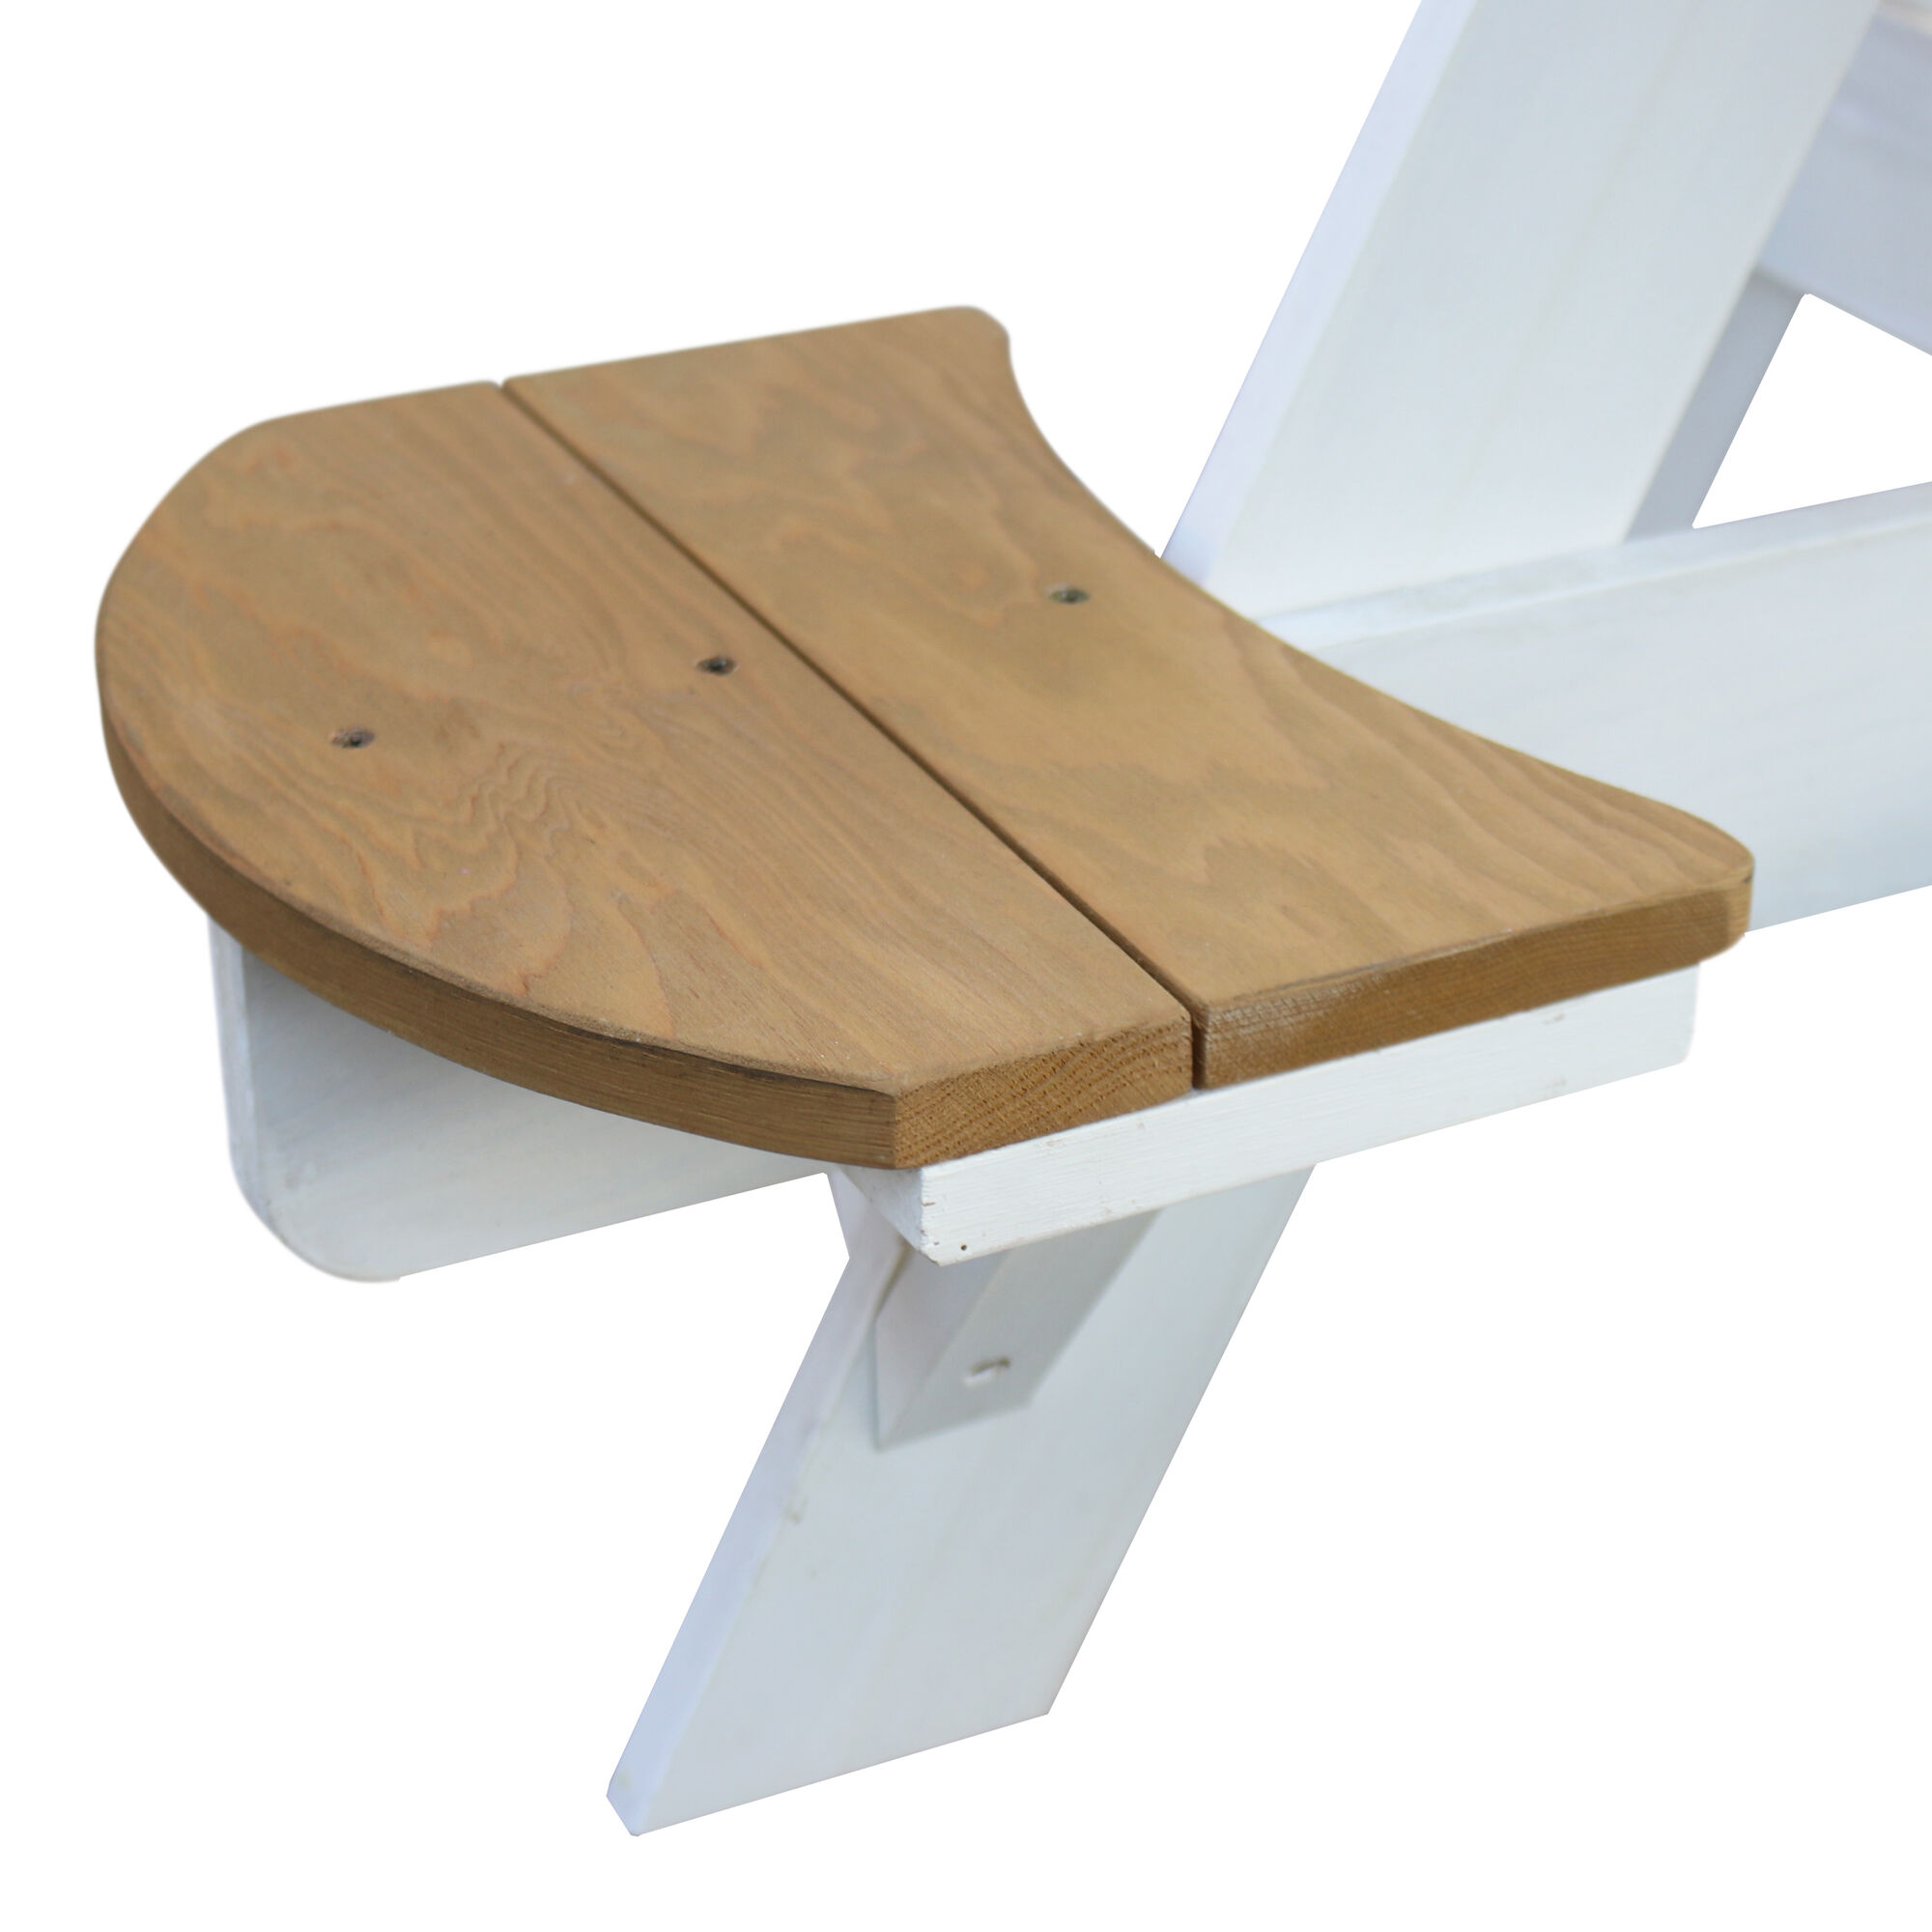 productfoto AXI UFO Picknicktafel Rond Bruin/wit